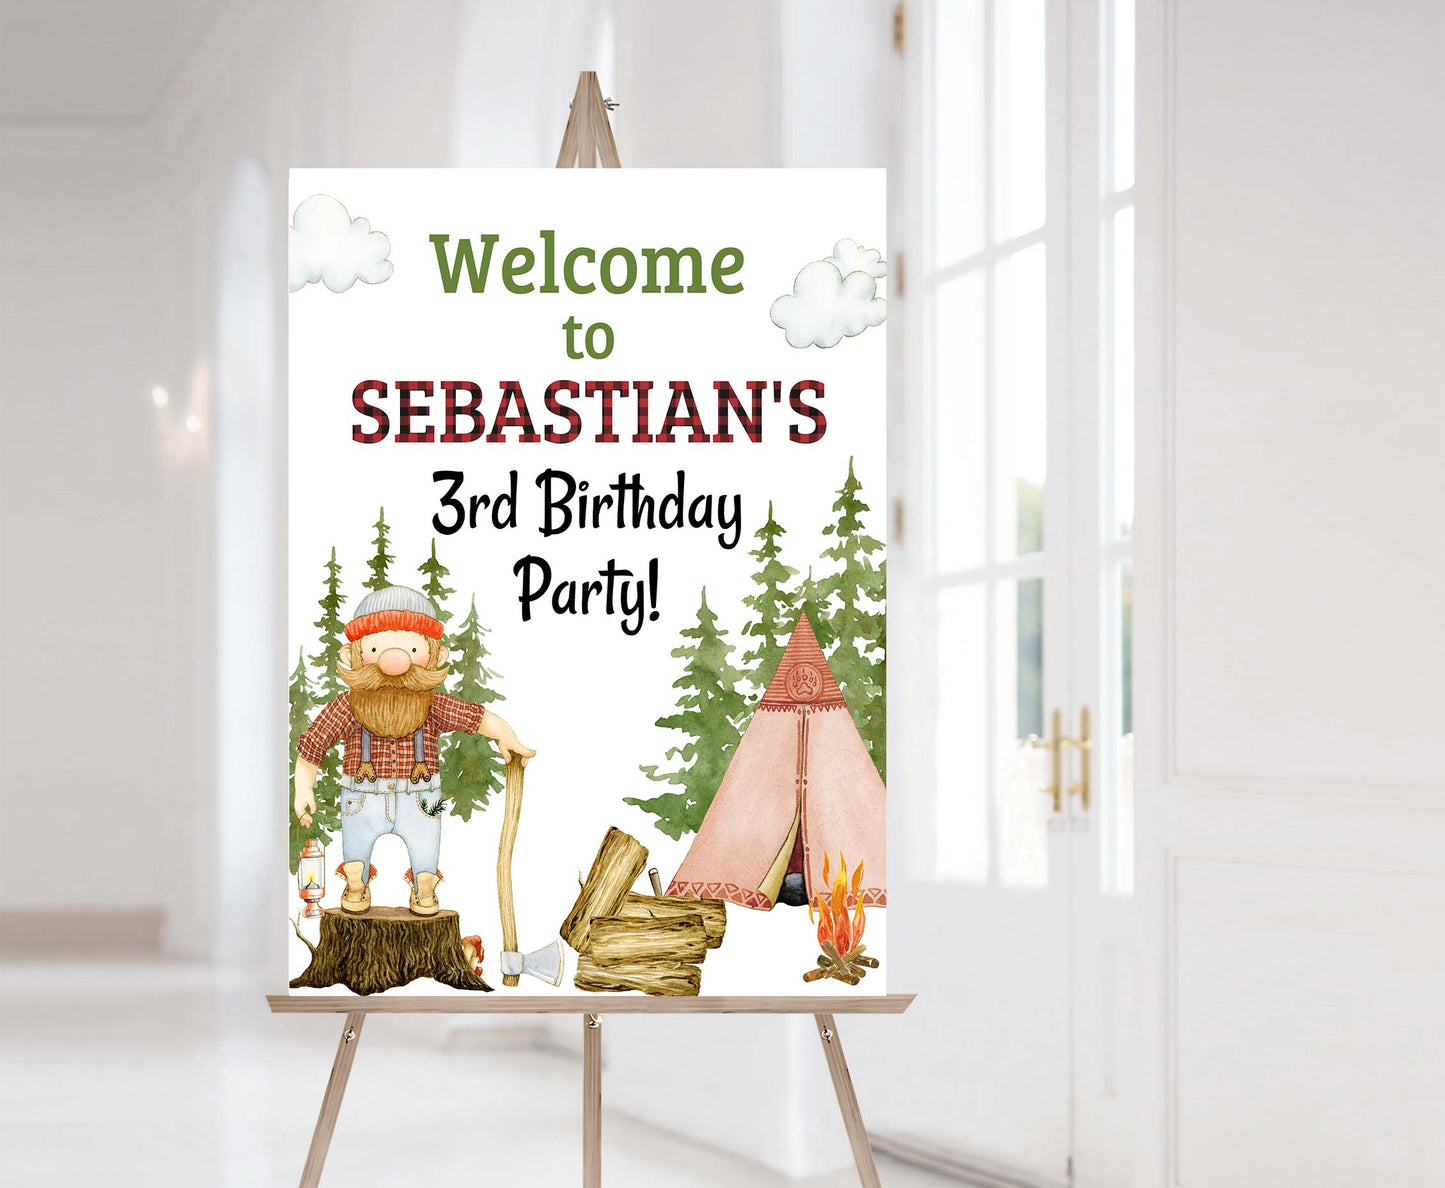 Editable Lumberjack Welcome Sign | Lumberjack birthday party decorations - 19A